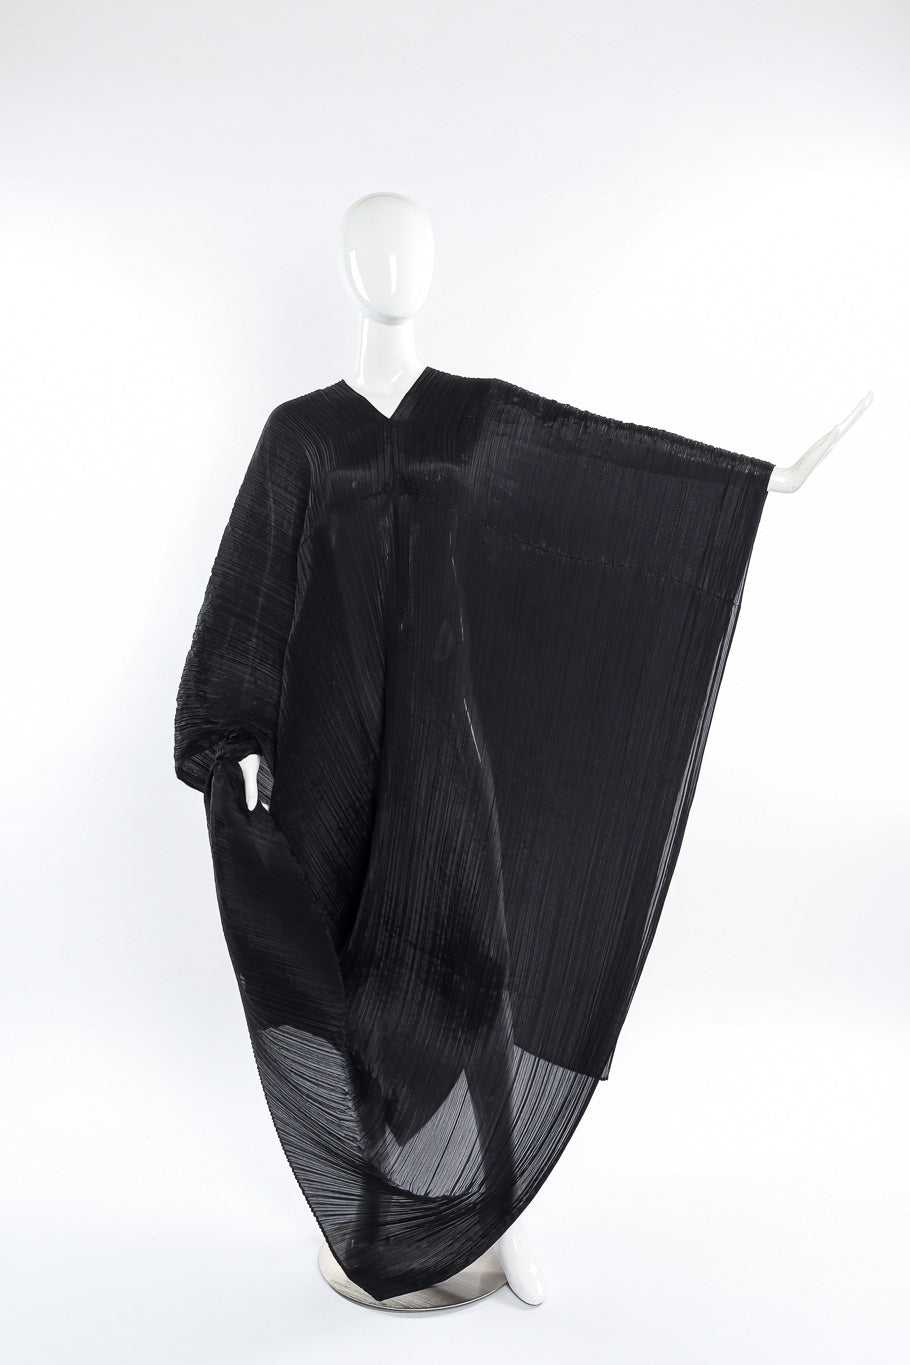 Pleats Please Issey Miyake Pleated Multi-Wrap Poncho II front view on mannequin with left arm extended for sleeve span @Recessla